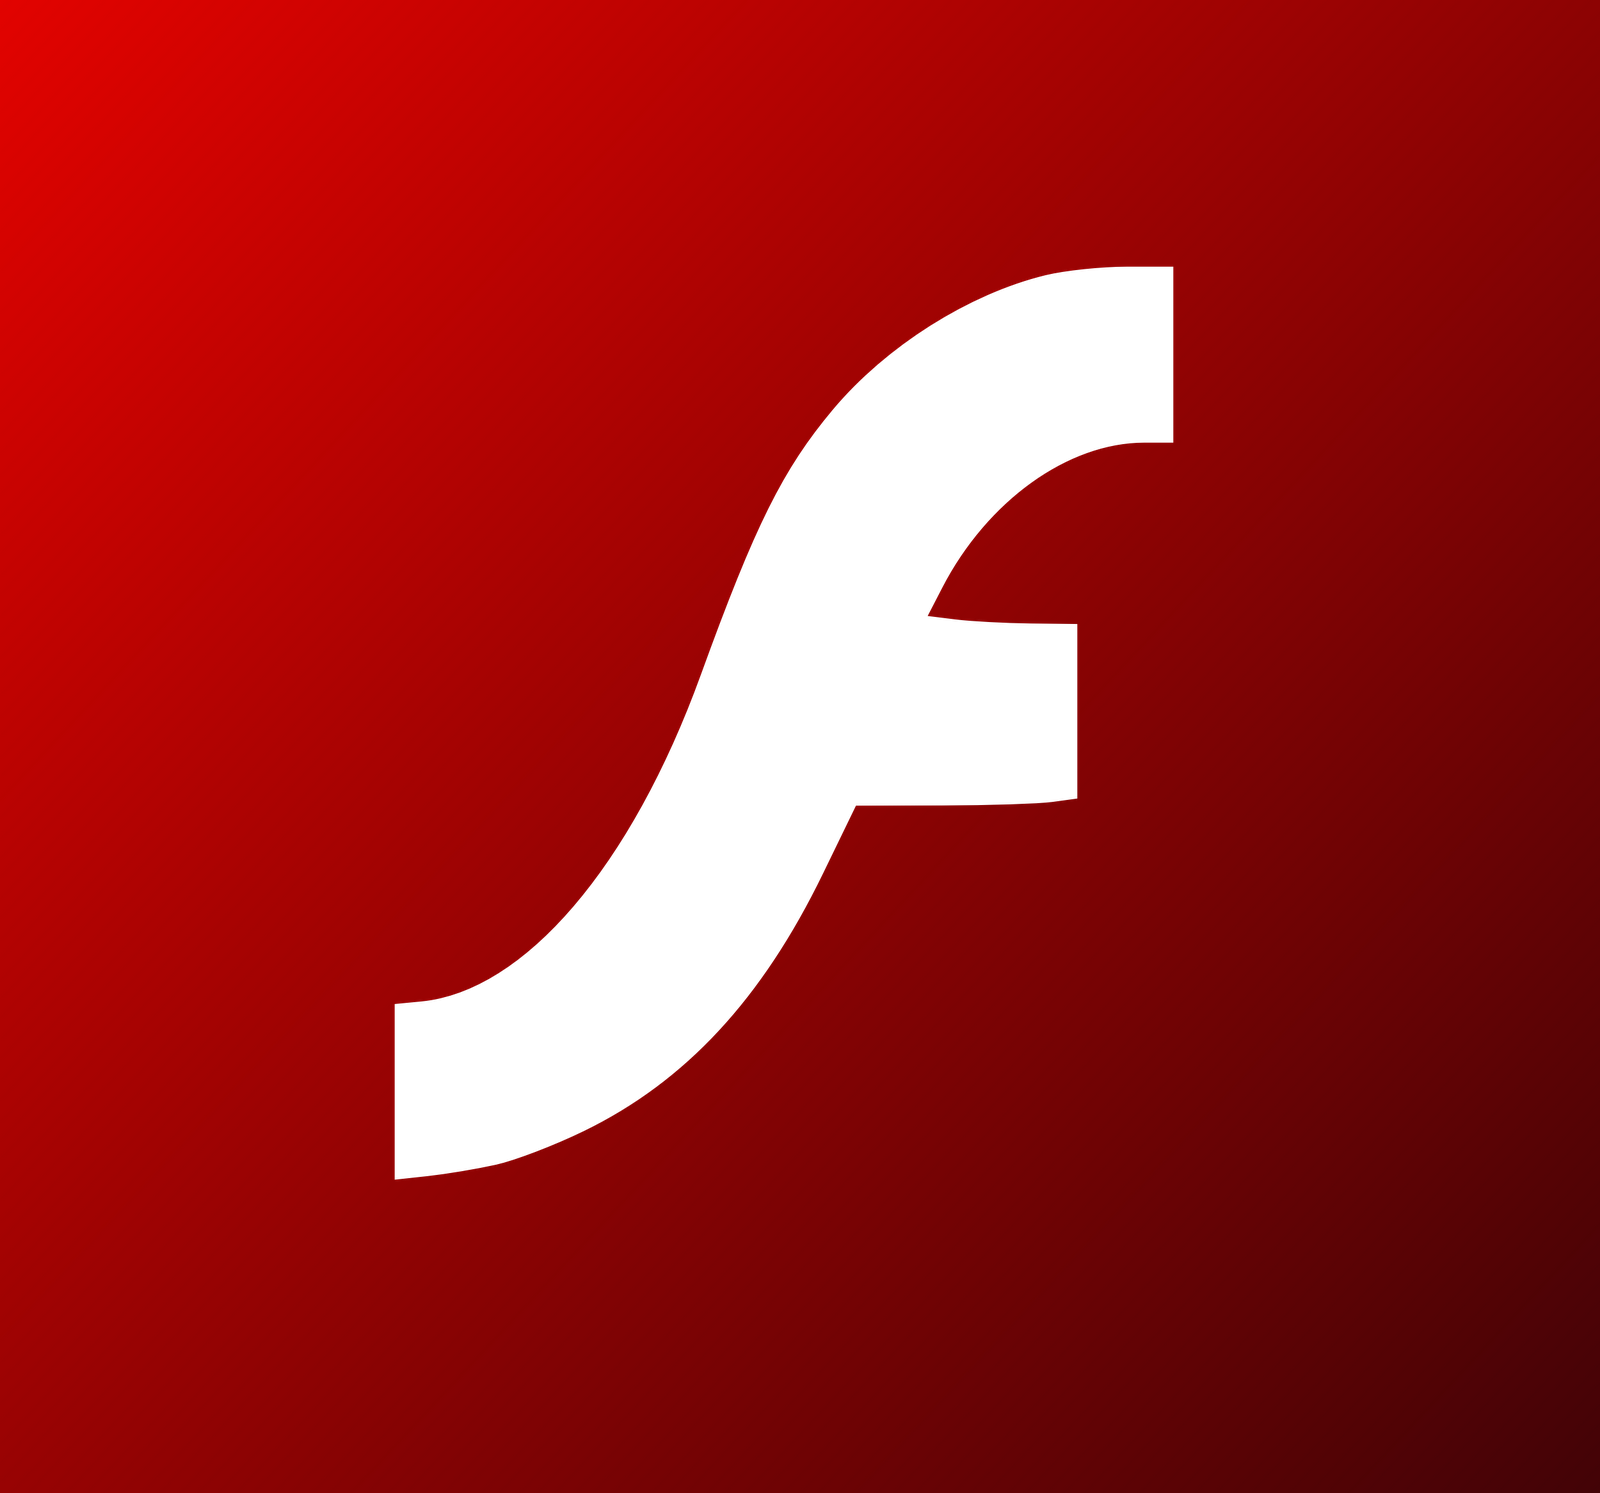 Download Adobe Flash Player 11.2 Apk For Android